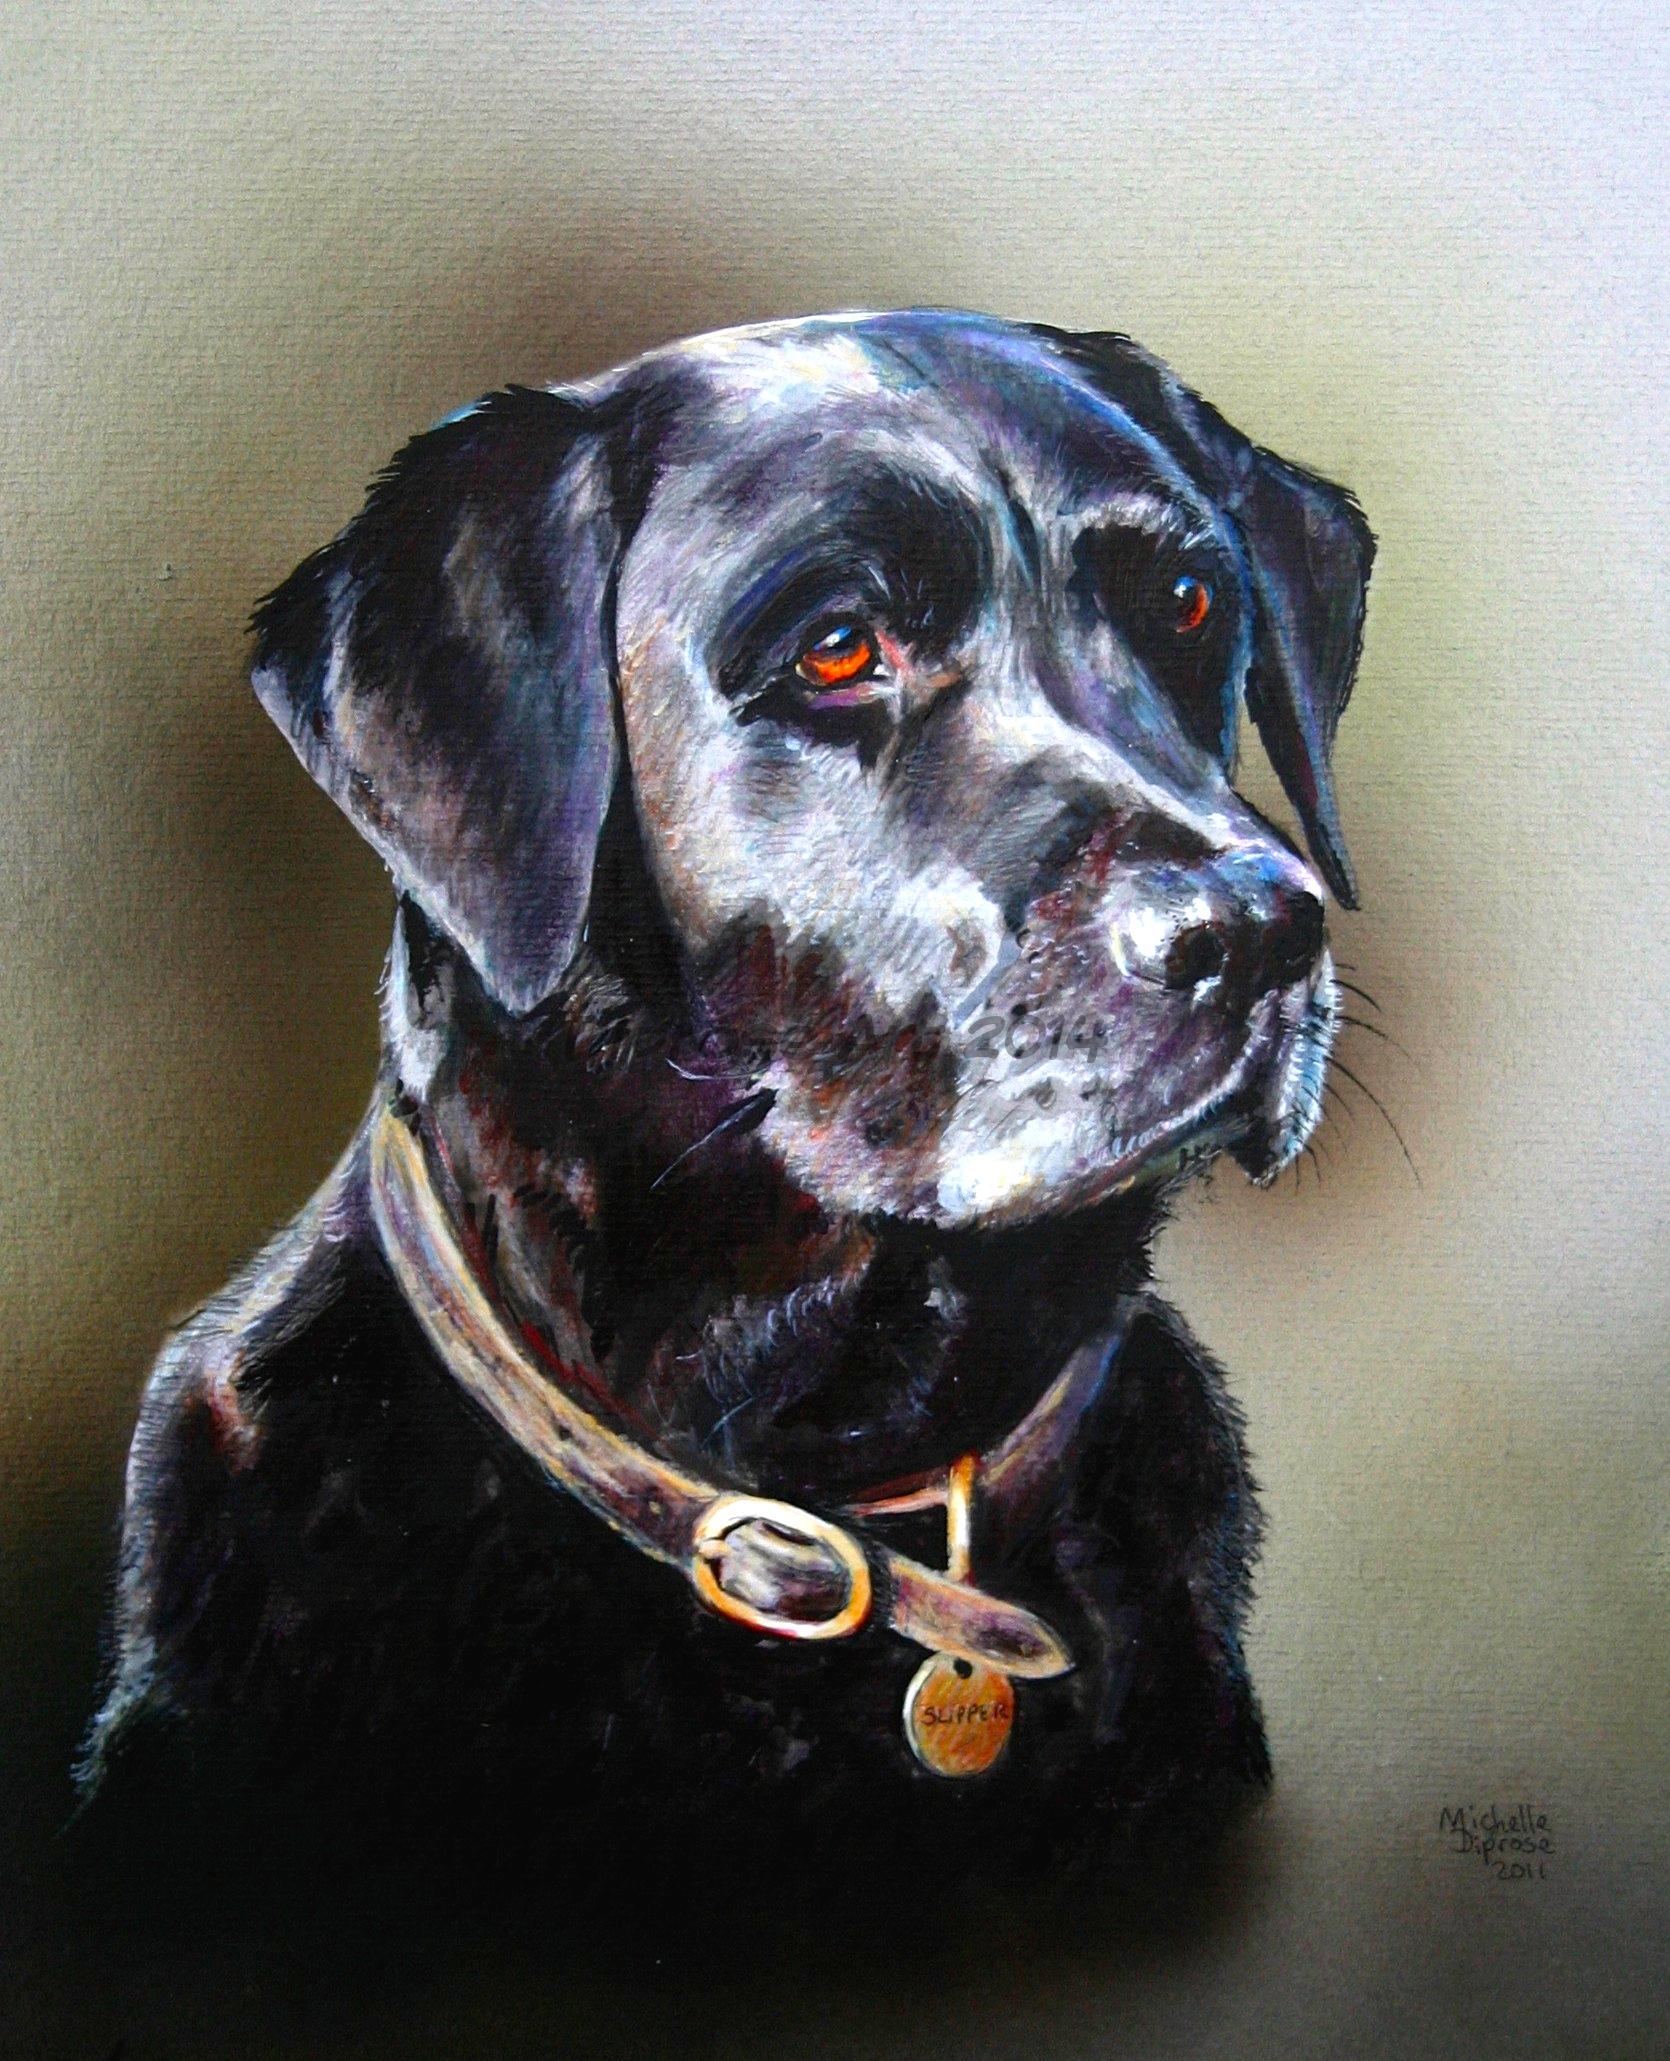 Acrylics on board - approx A4 - pet dog portrait - Slipper is a beautiful black labrador - I lover her name too!